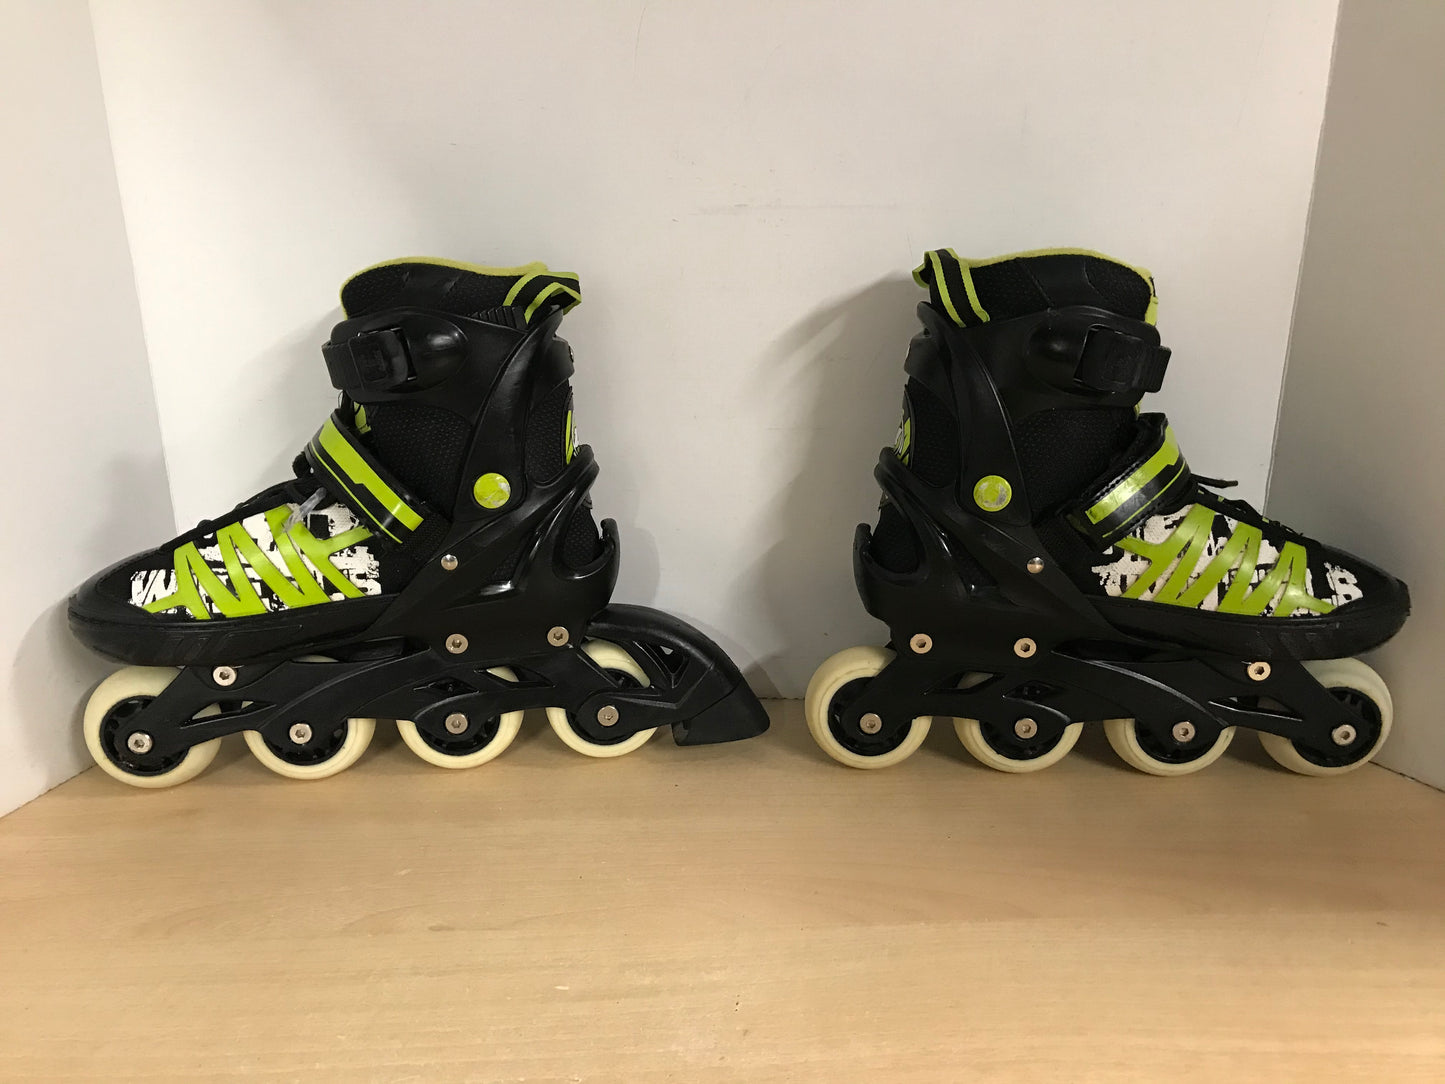 Inline Roller Skates Child Size 5-8 Youth Ultra Wheels Black Lime Rubber Wheels